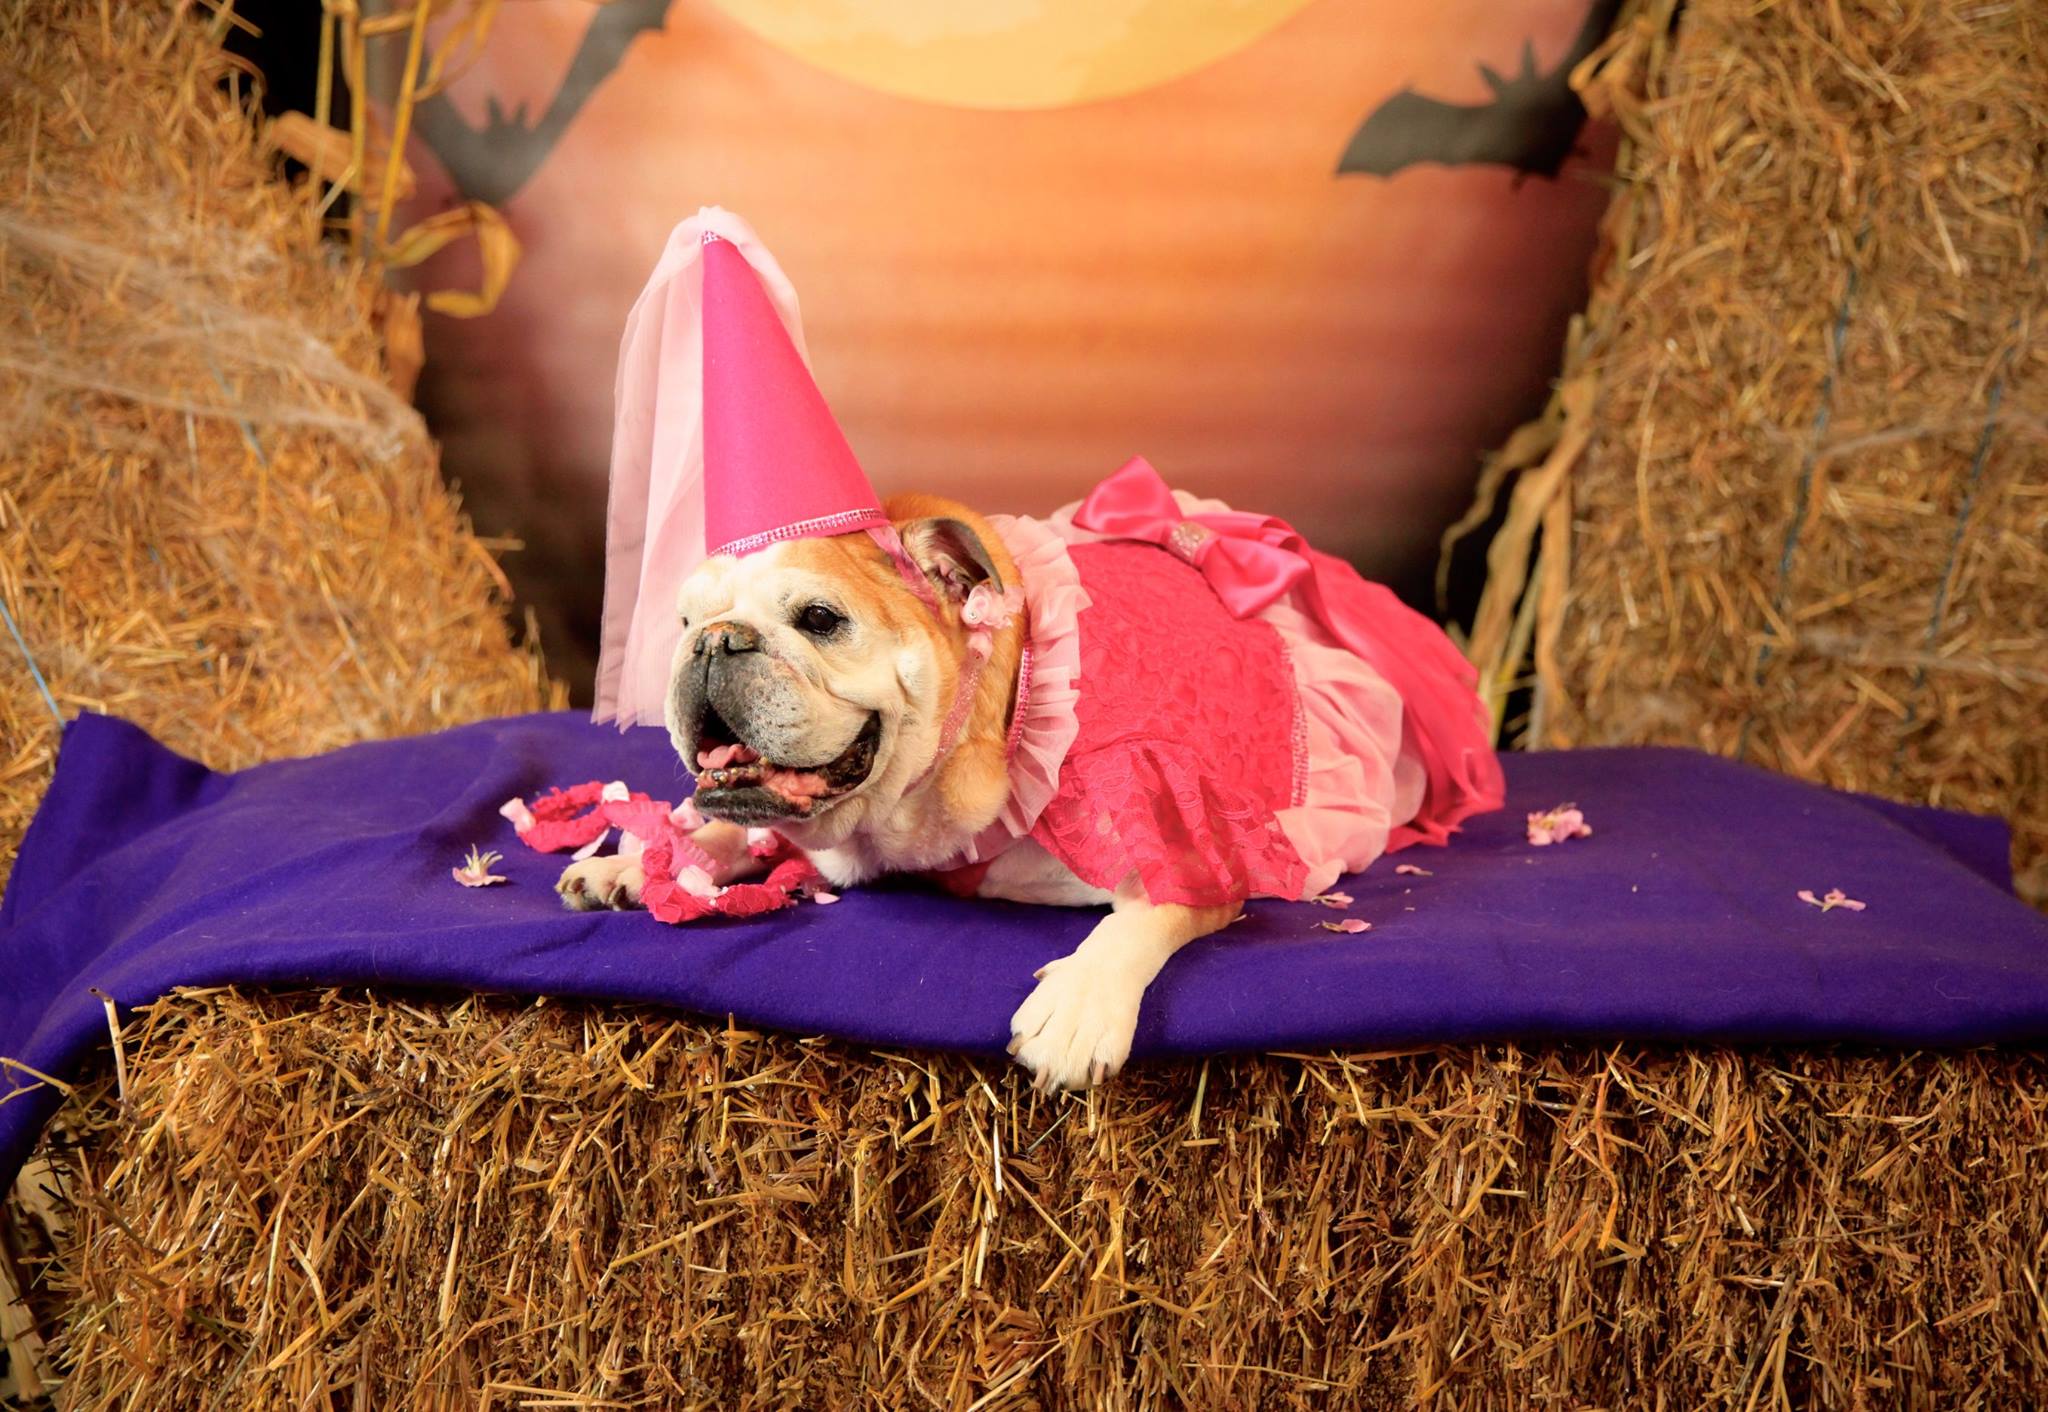 Fun Halloween Costume Ideas For You and Your Dog - Cascade Kennels